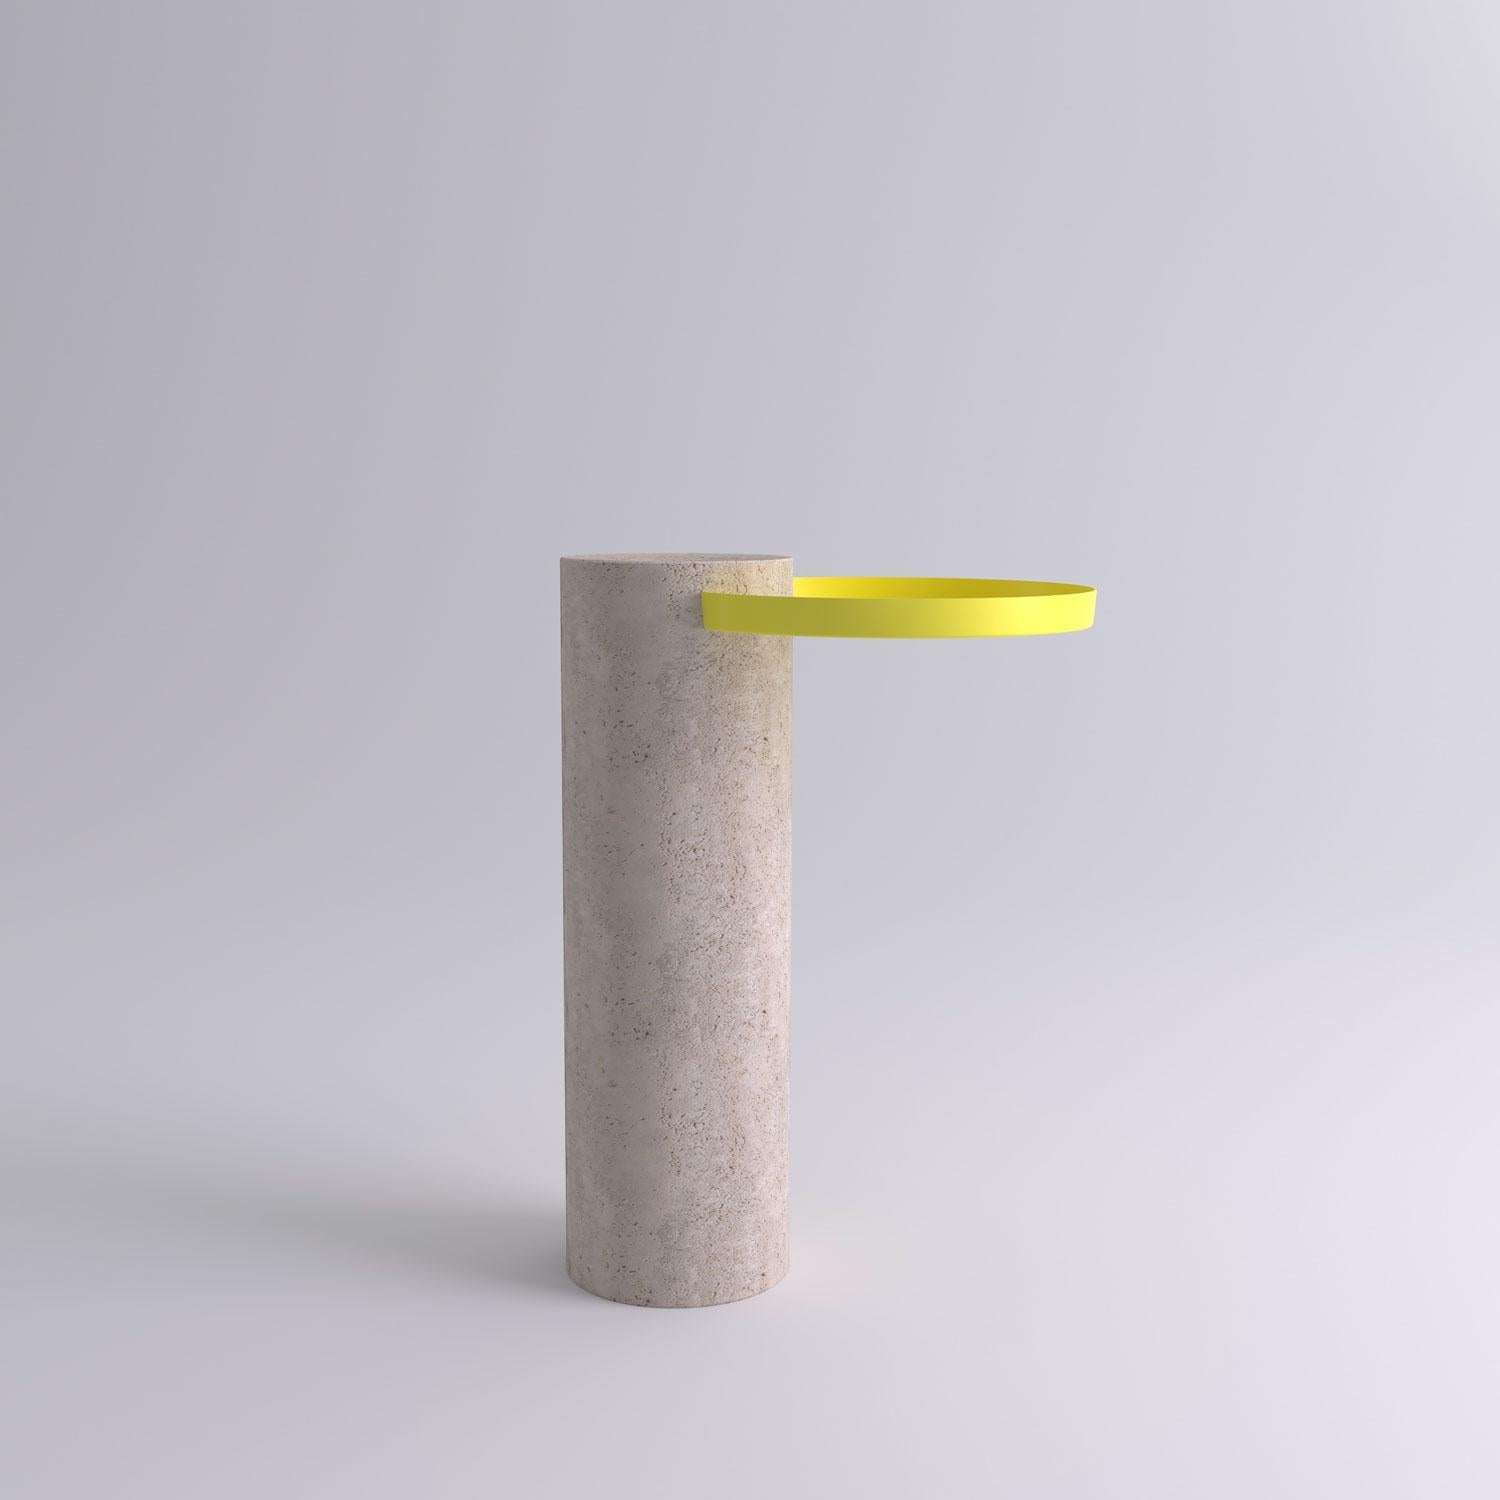 High travertine contemporary guéridon, Sebastian Herkner
Dimensions: D 42 x H 57 cm
Materials: Travertine stone, yellow metal tray

The salute table exists in 3 sizes, 4 different marble stones for the column and 5 different finishes for the